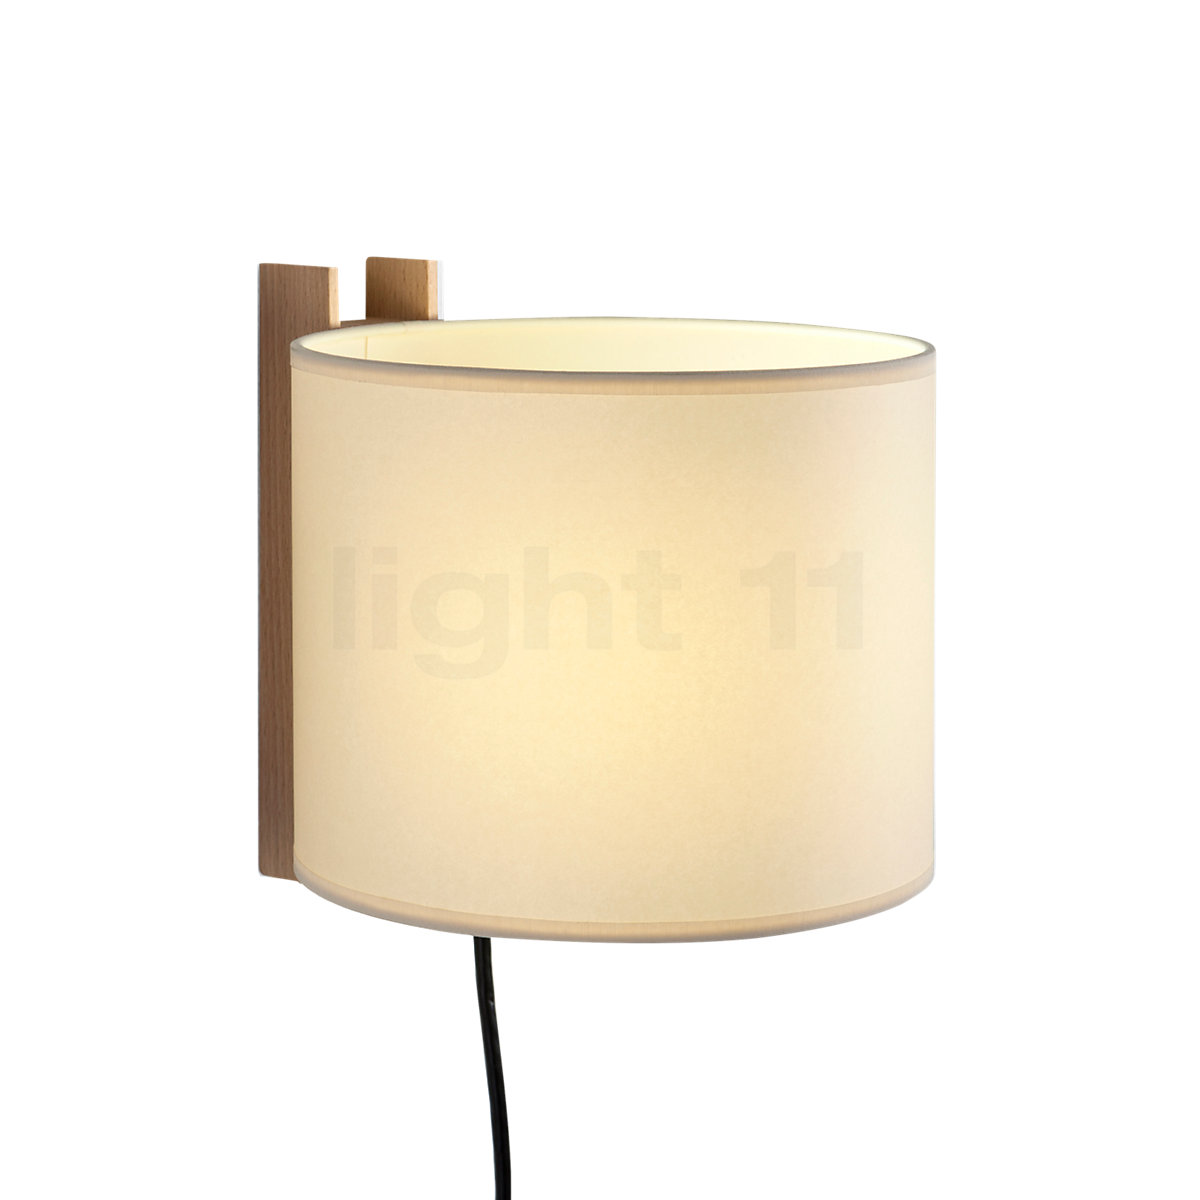 Santa Cole Tmm Wall Light At Light11 Eu, How To Turn A Table Lamp Into Wall